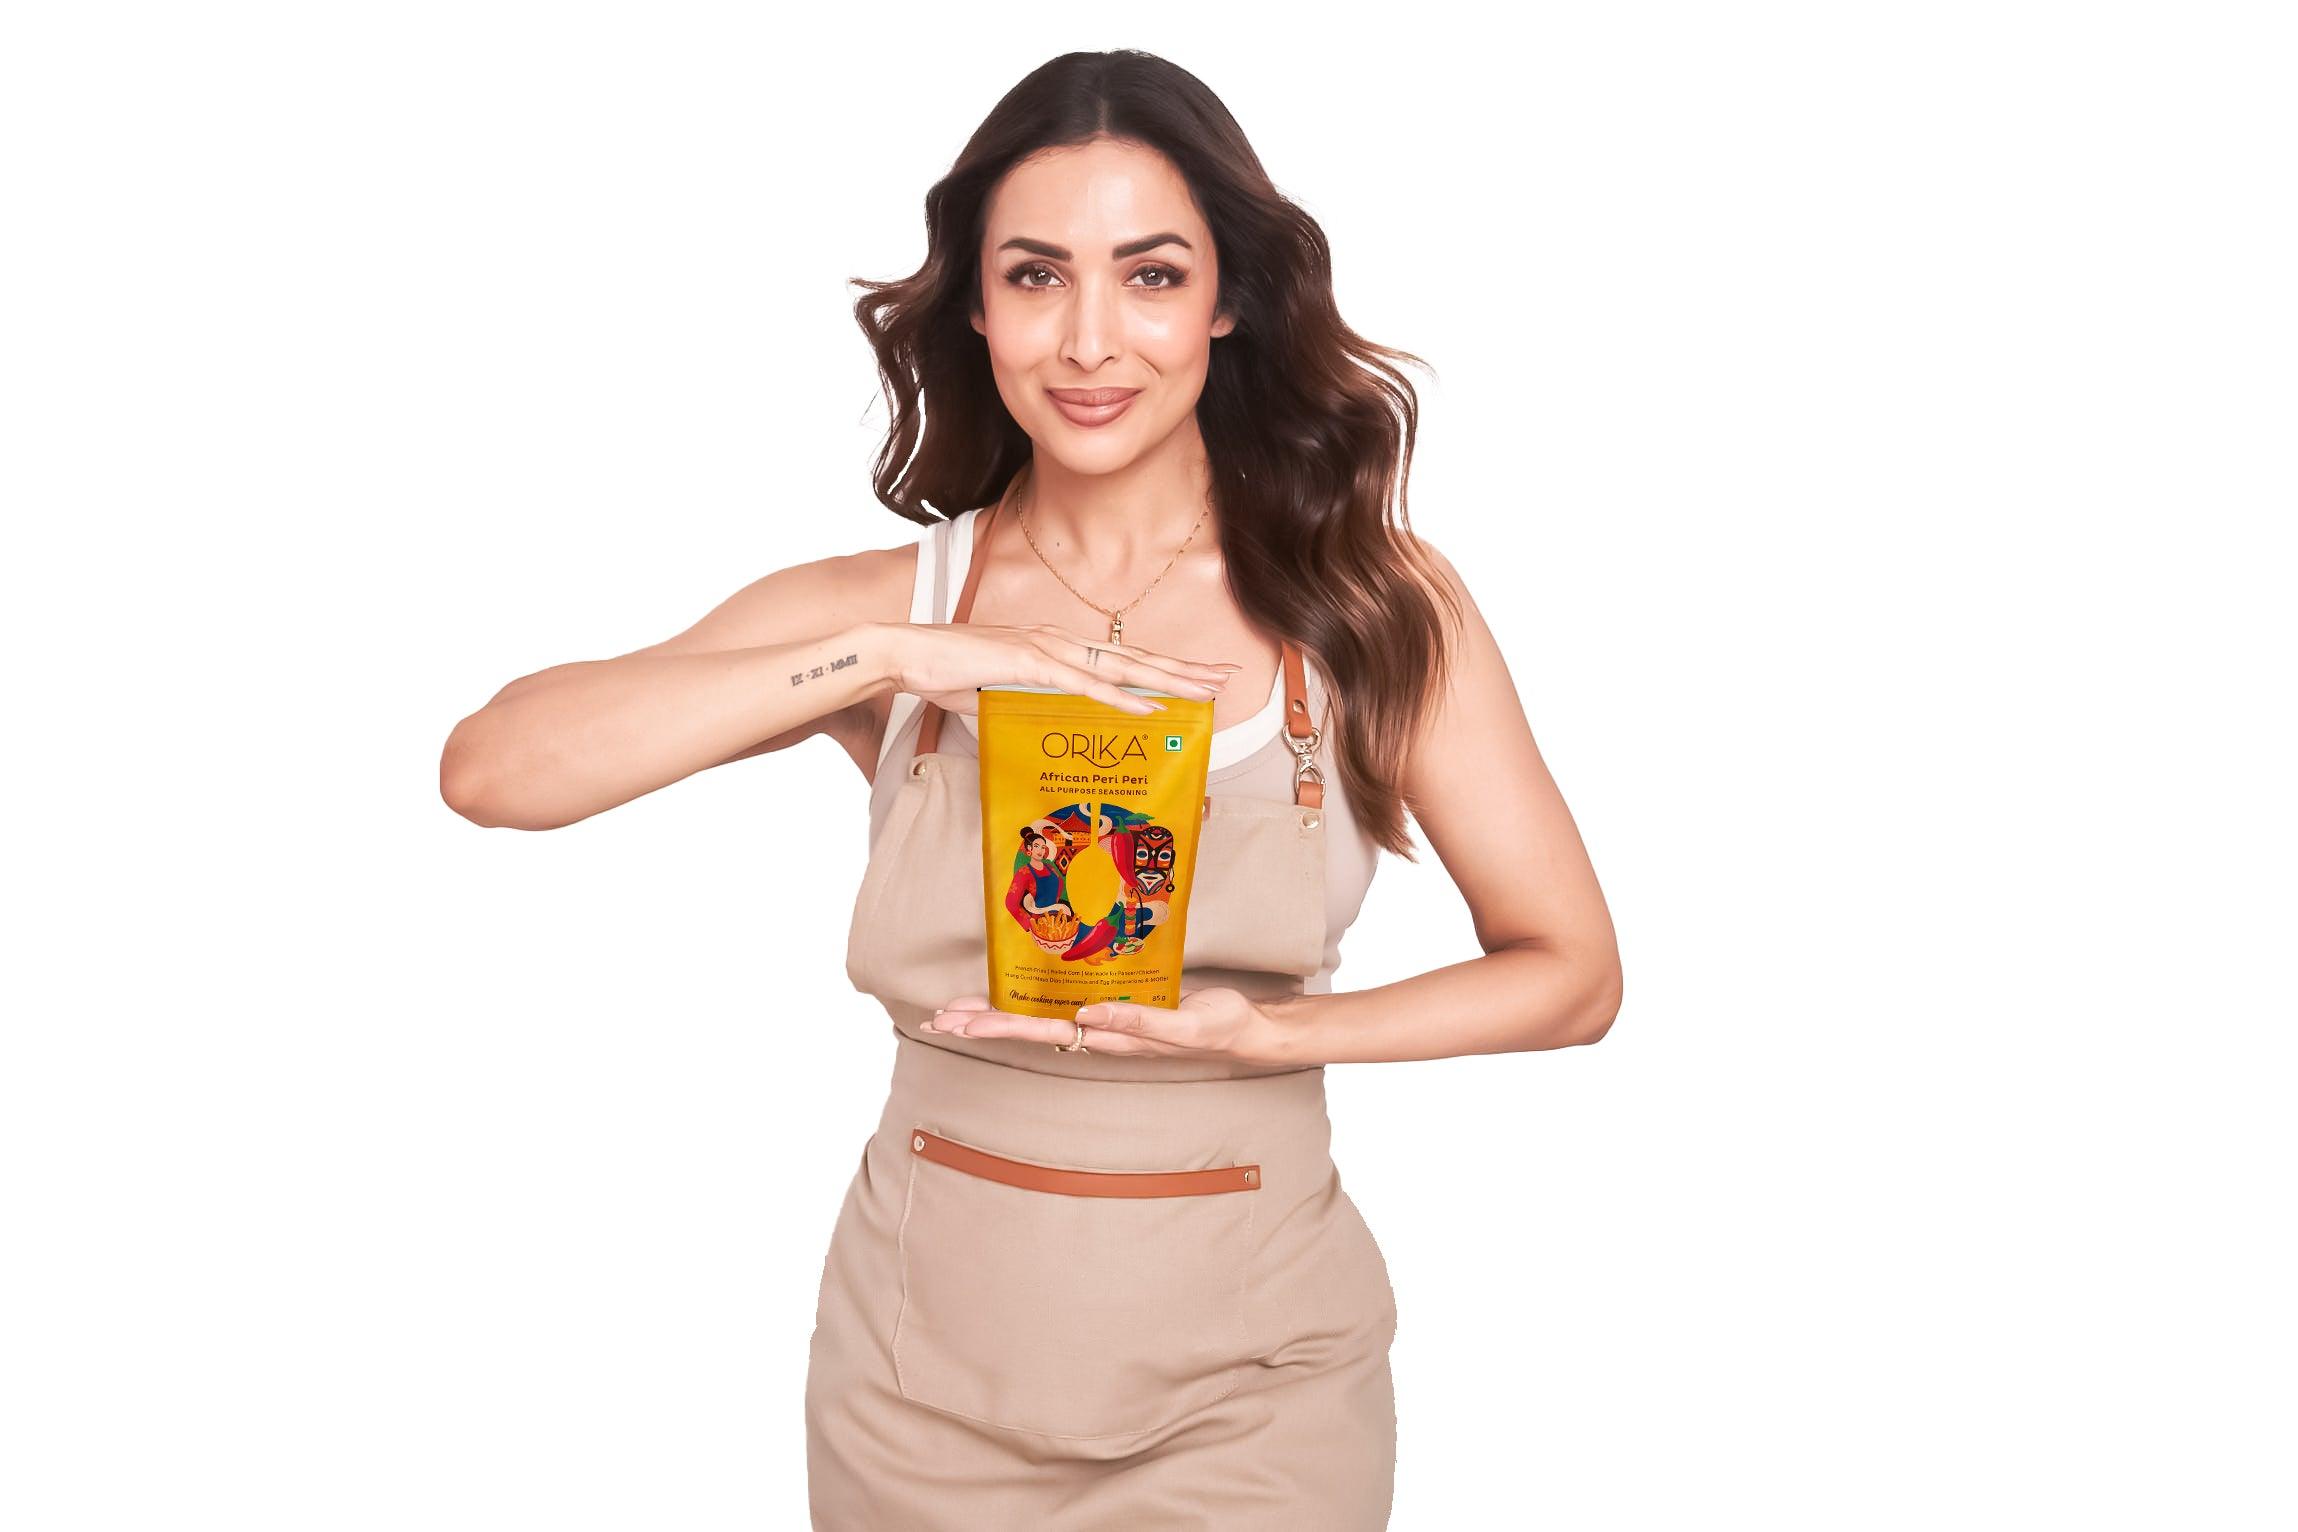 Orika Spices ropes in Malaika Arora as brand ambassador for two years - Orika Spices India